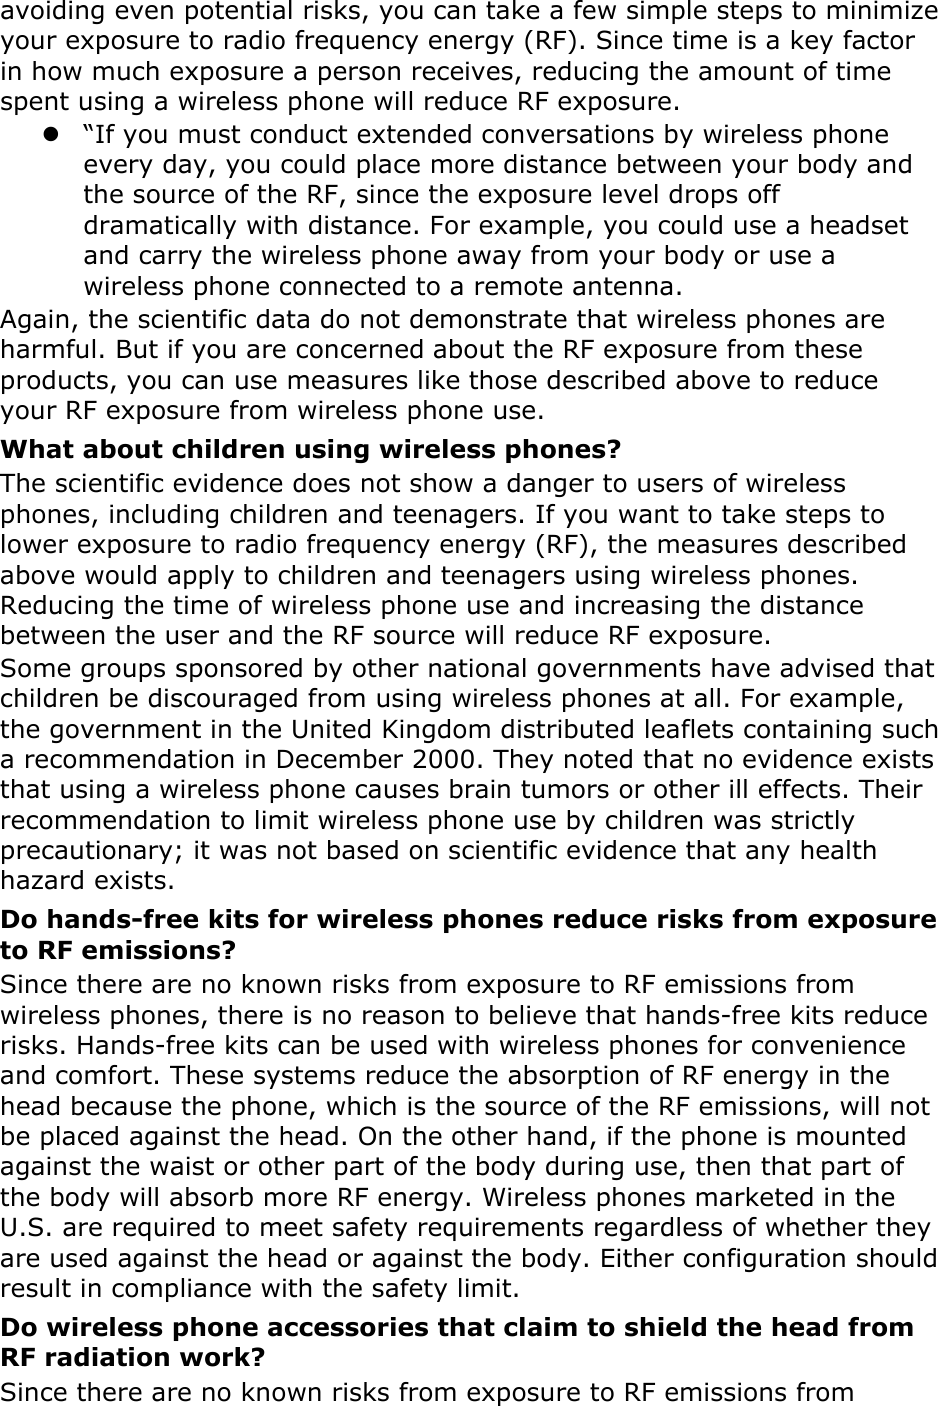 avoiding even potential risks, you can take a few simple steps to minimize your exposure to radio frequency energy (RF). Since time is a key factor in how much exposure a person receives, reducing the amount of time spent using a wireless phone will reduce RF exposure. z “If you must conduct extended conversations by wireless phone every day, you could place more distance between your body and the source of the RF, since the exposure level drops off dramatically with distance. For example, you could use a headset and carry the wireless phone away from your body or use a wireless phone connected to a remote antenna. Again, the scientific data do not demonstrate that wireless phones are harmful. But if you are concerned about the RF exposure from these products, you can use measures like those described above to reduce your RF exposure from wireless phone use. What about children using wireless phones? The scientific evidence does not show a danger to users of wireless phones, including children and teenagers. If you want to take steps to lower exposure to radio frequency energy (RF), the measures described above would apply to children and teenagers using wireless phones. Reducing the time of wireless phone use and increasing the distance between the user and the RF source will reduce RF exposure. Some groups sponsored by other national governments have advised that children be discouraged from using wireless phones at all. For example, the government in the United Kingdom distributed leaflets containing such a recommendation in December 2000. They noted that no evidence exists that using a wireless phone causes brain tumors or other ill effects. Their recommendation to limit wireless phone use by children was strictly precautionary; it was not based on scientific evidence that any health hazard exists.   Do hands-free kits for wireless phones reduce risks from exposure to RF emissions? Since there are no known risks from exposure to RF emissions from wireless phones, there is no reason to believe that hands-free kits reduce risks. Hands-free kits can be used with wireless phones for convenience and comfort. These systems reduce the absorption of RF energy in the head because the phone, which is the source of the RF emissions, will not be placed against the head. On the other hand, if the phone is mounted against the waist or other part of the body during use, then that part of the body will absorb more RF energy. Wireless phones marketed in the U.S. are required to meet safety requirements regardless of whether they are used against the head or against the body. Either configuration should result in compliance with the safety limit. Do wireless phone accessories that claim to shield the head from RF radiation work? Since there are no known risks from exposure to RF emissions from 